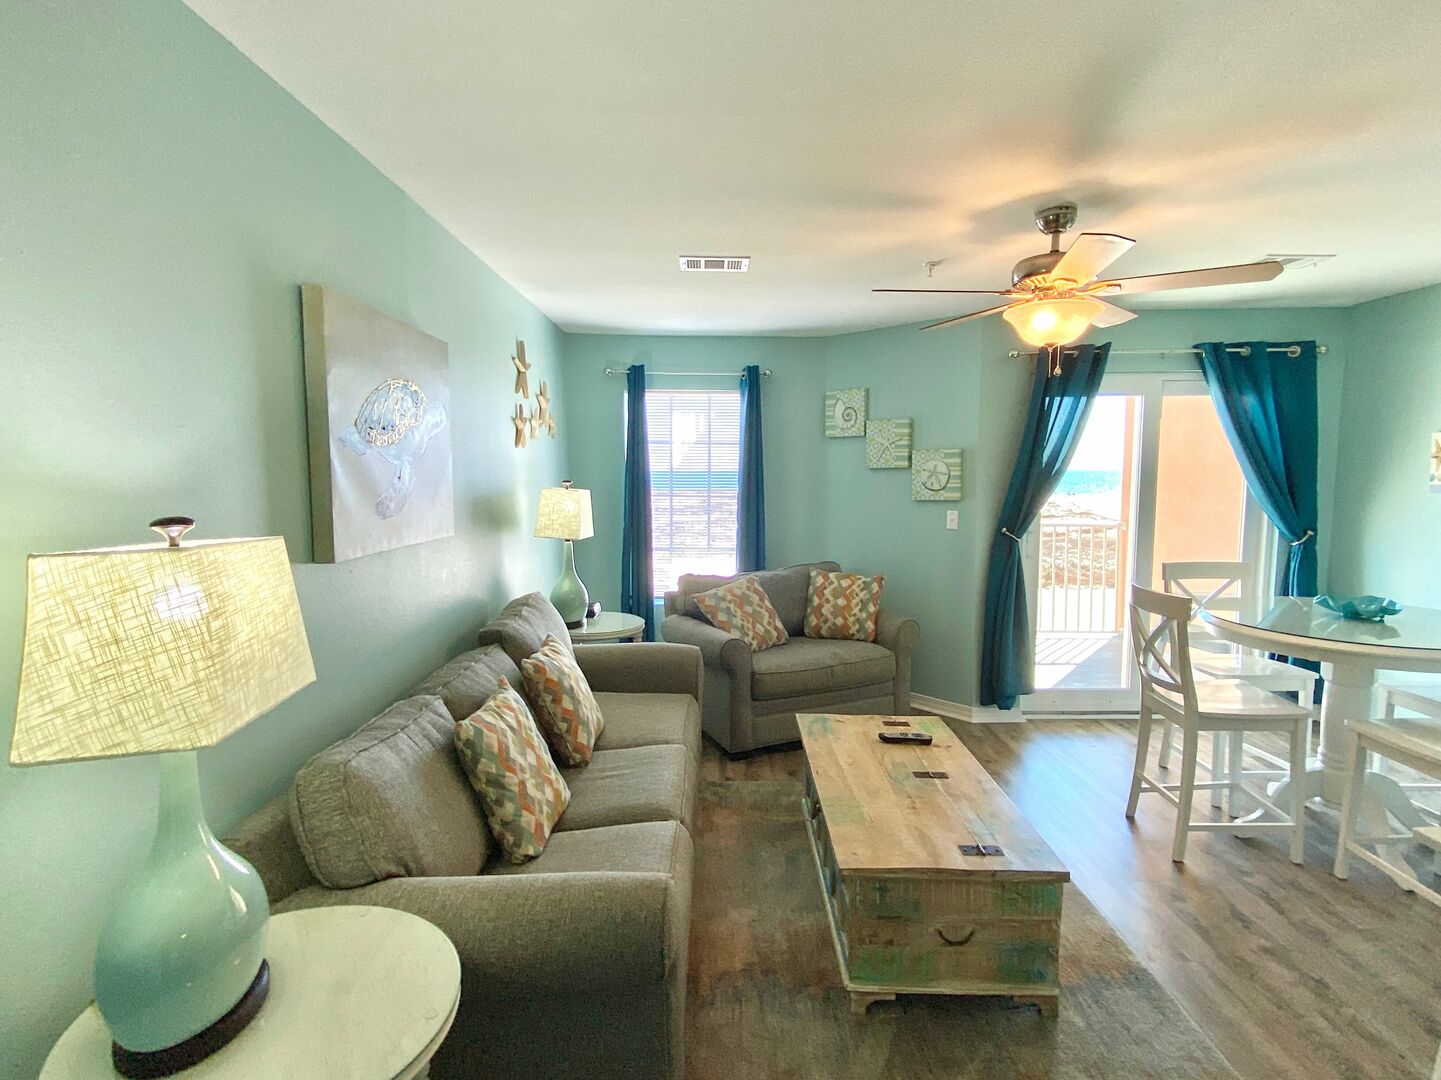 The interior of one of our fort morgan pet friendly rentals